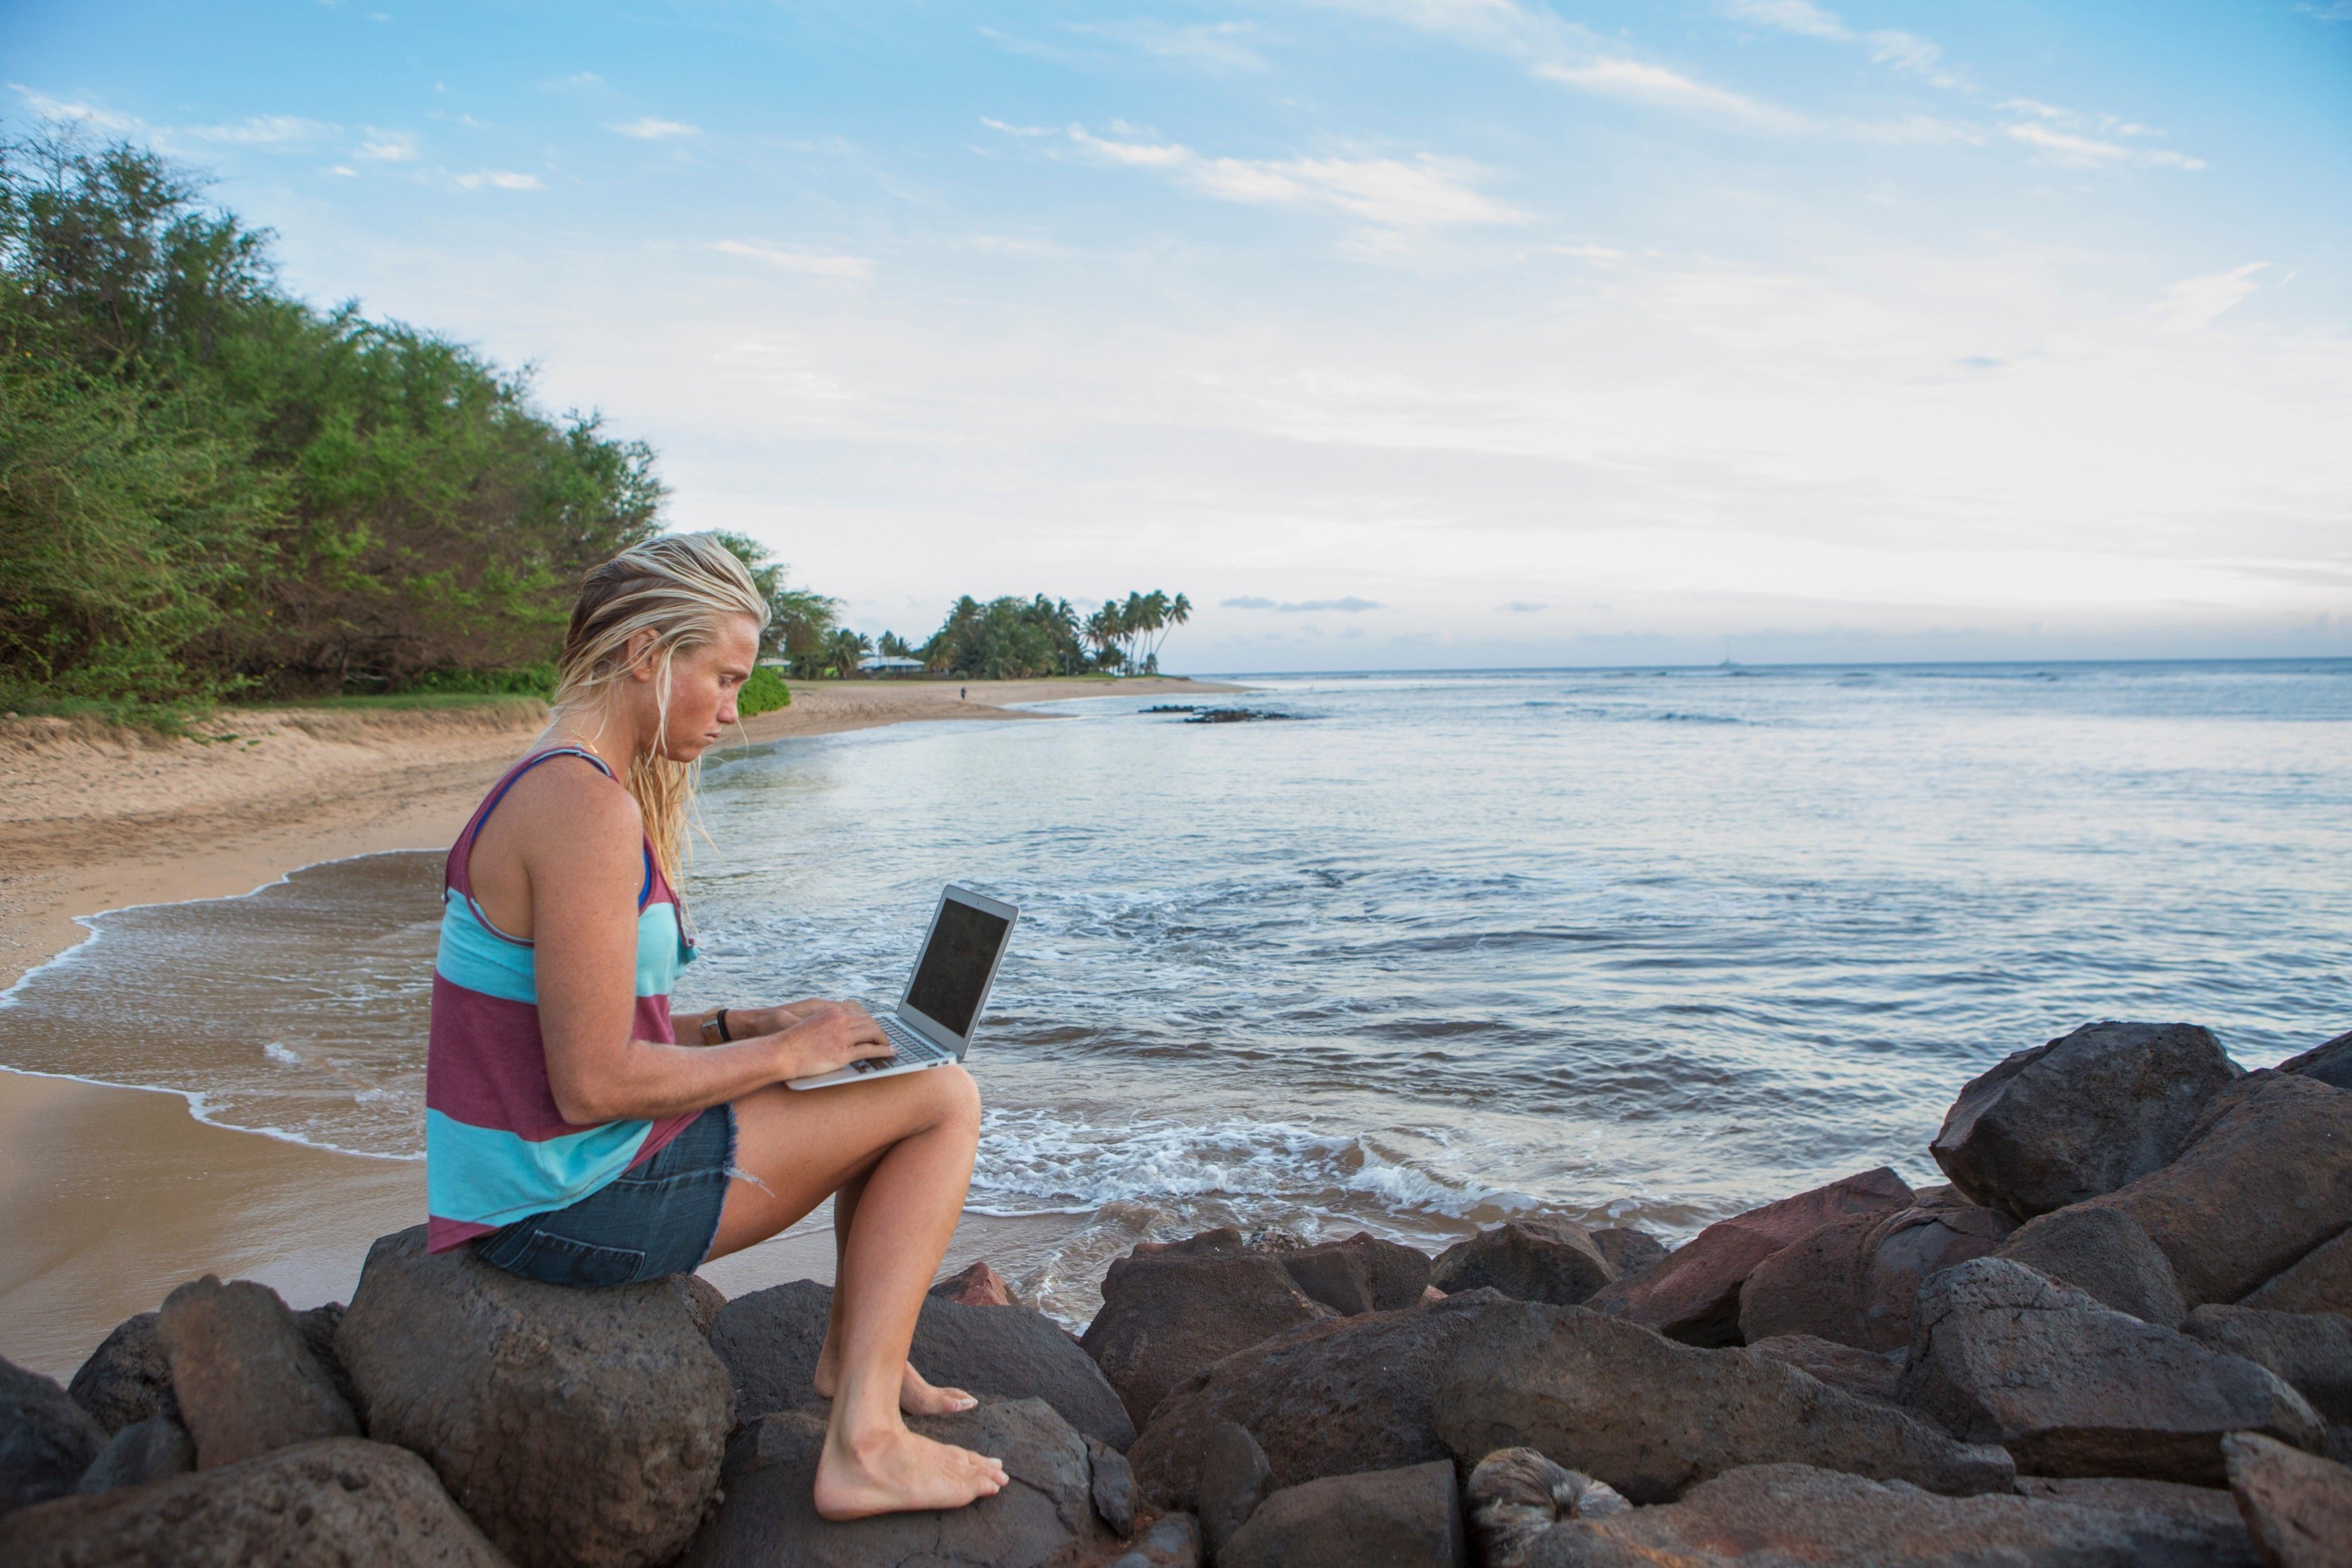 A person working from their laptop on the beach, with no external hard drive.